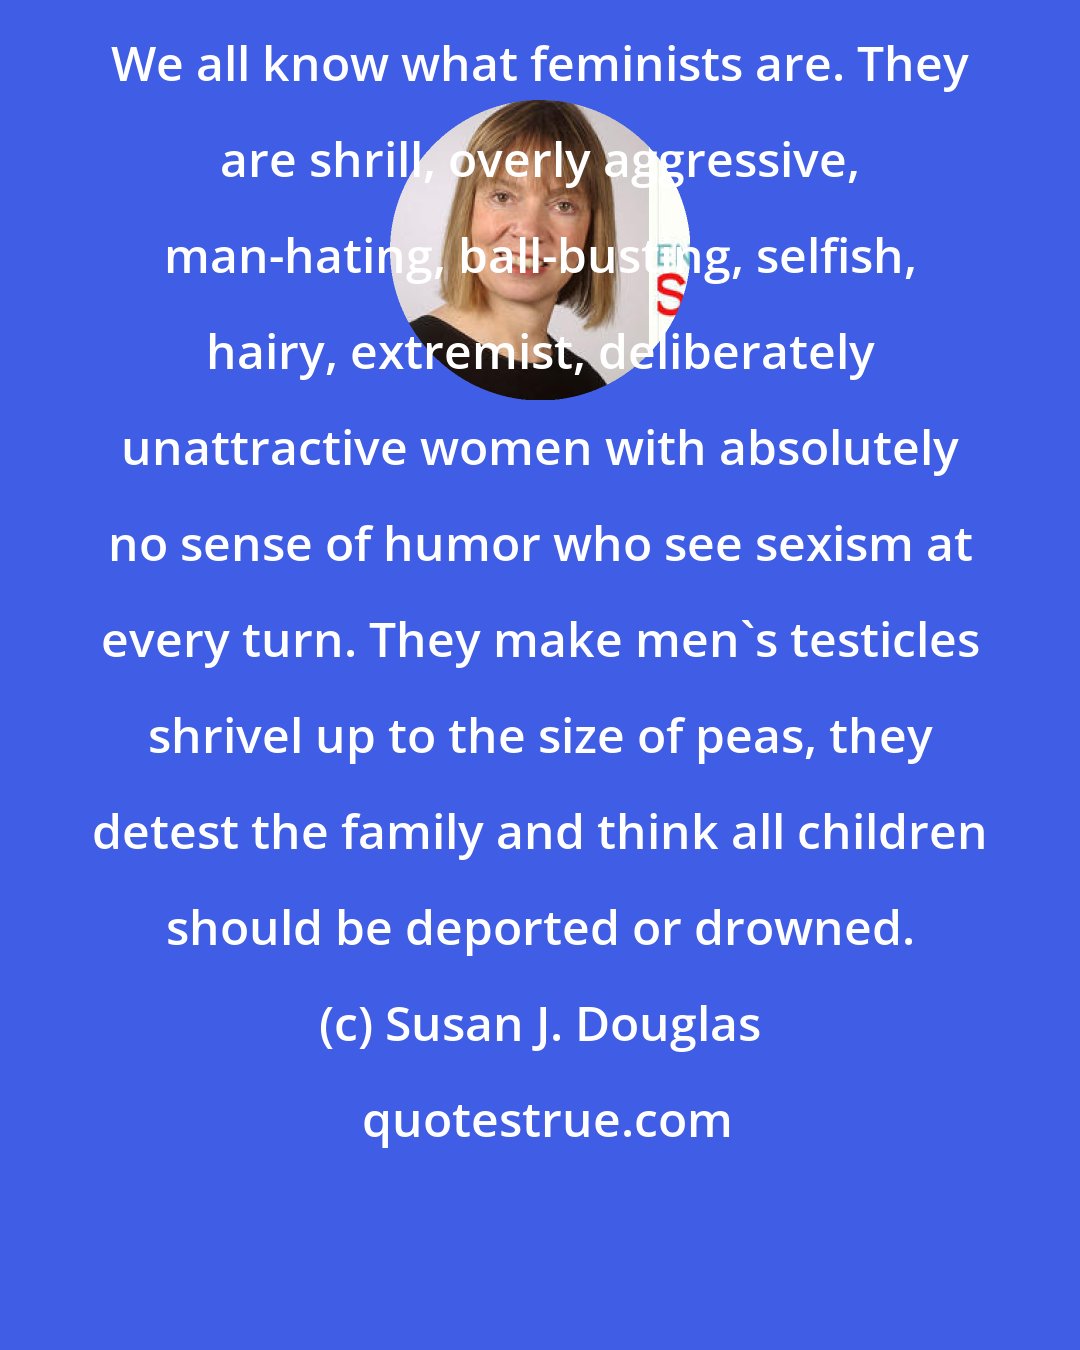 Susan J. Douglas: We all know what feminists are. They are shrill, overly aggressive, man-hating, ball-busting, selfish, hairy, extremist, deliberately unattractive women with absolutely no sense of humor who see sexism at every turn. They make men's testicles shrivel up to the size of peas, they detest the family and think all children should be deported or drowned.